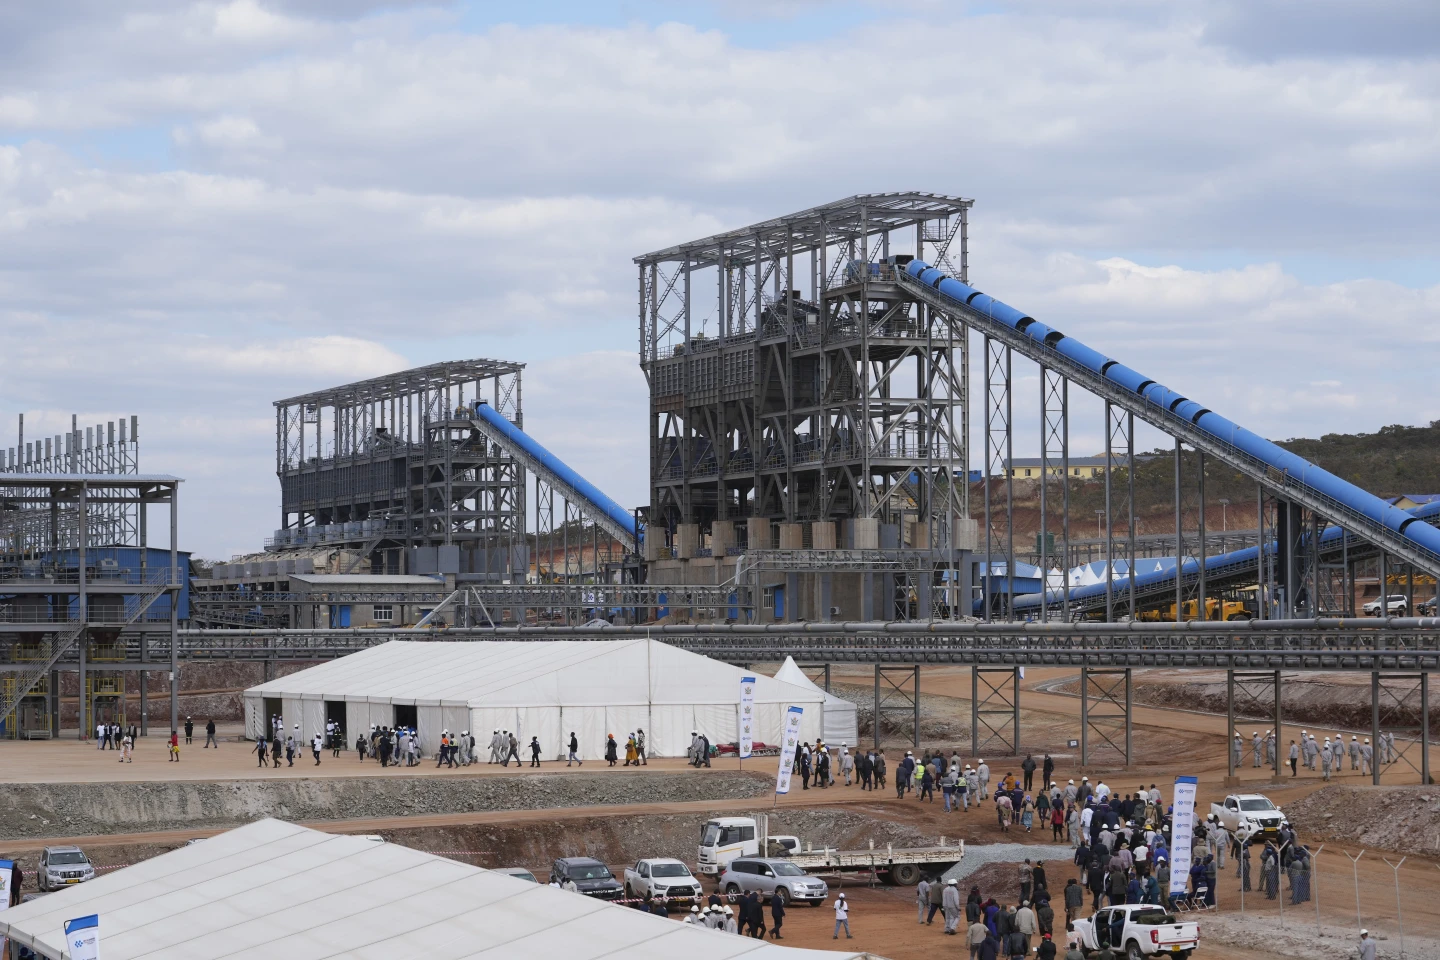 A Chinese Mining Company Has Opened a Giant Lithium Processing Plant in Zimbabwe